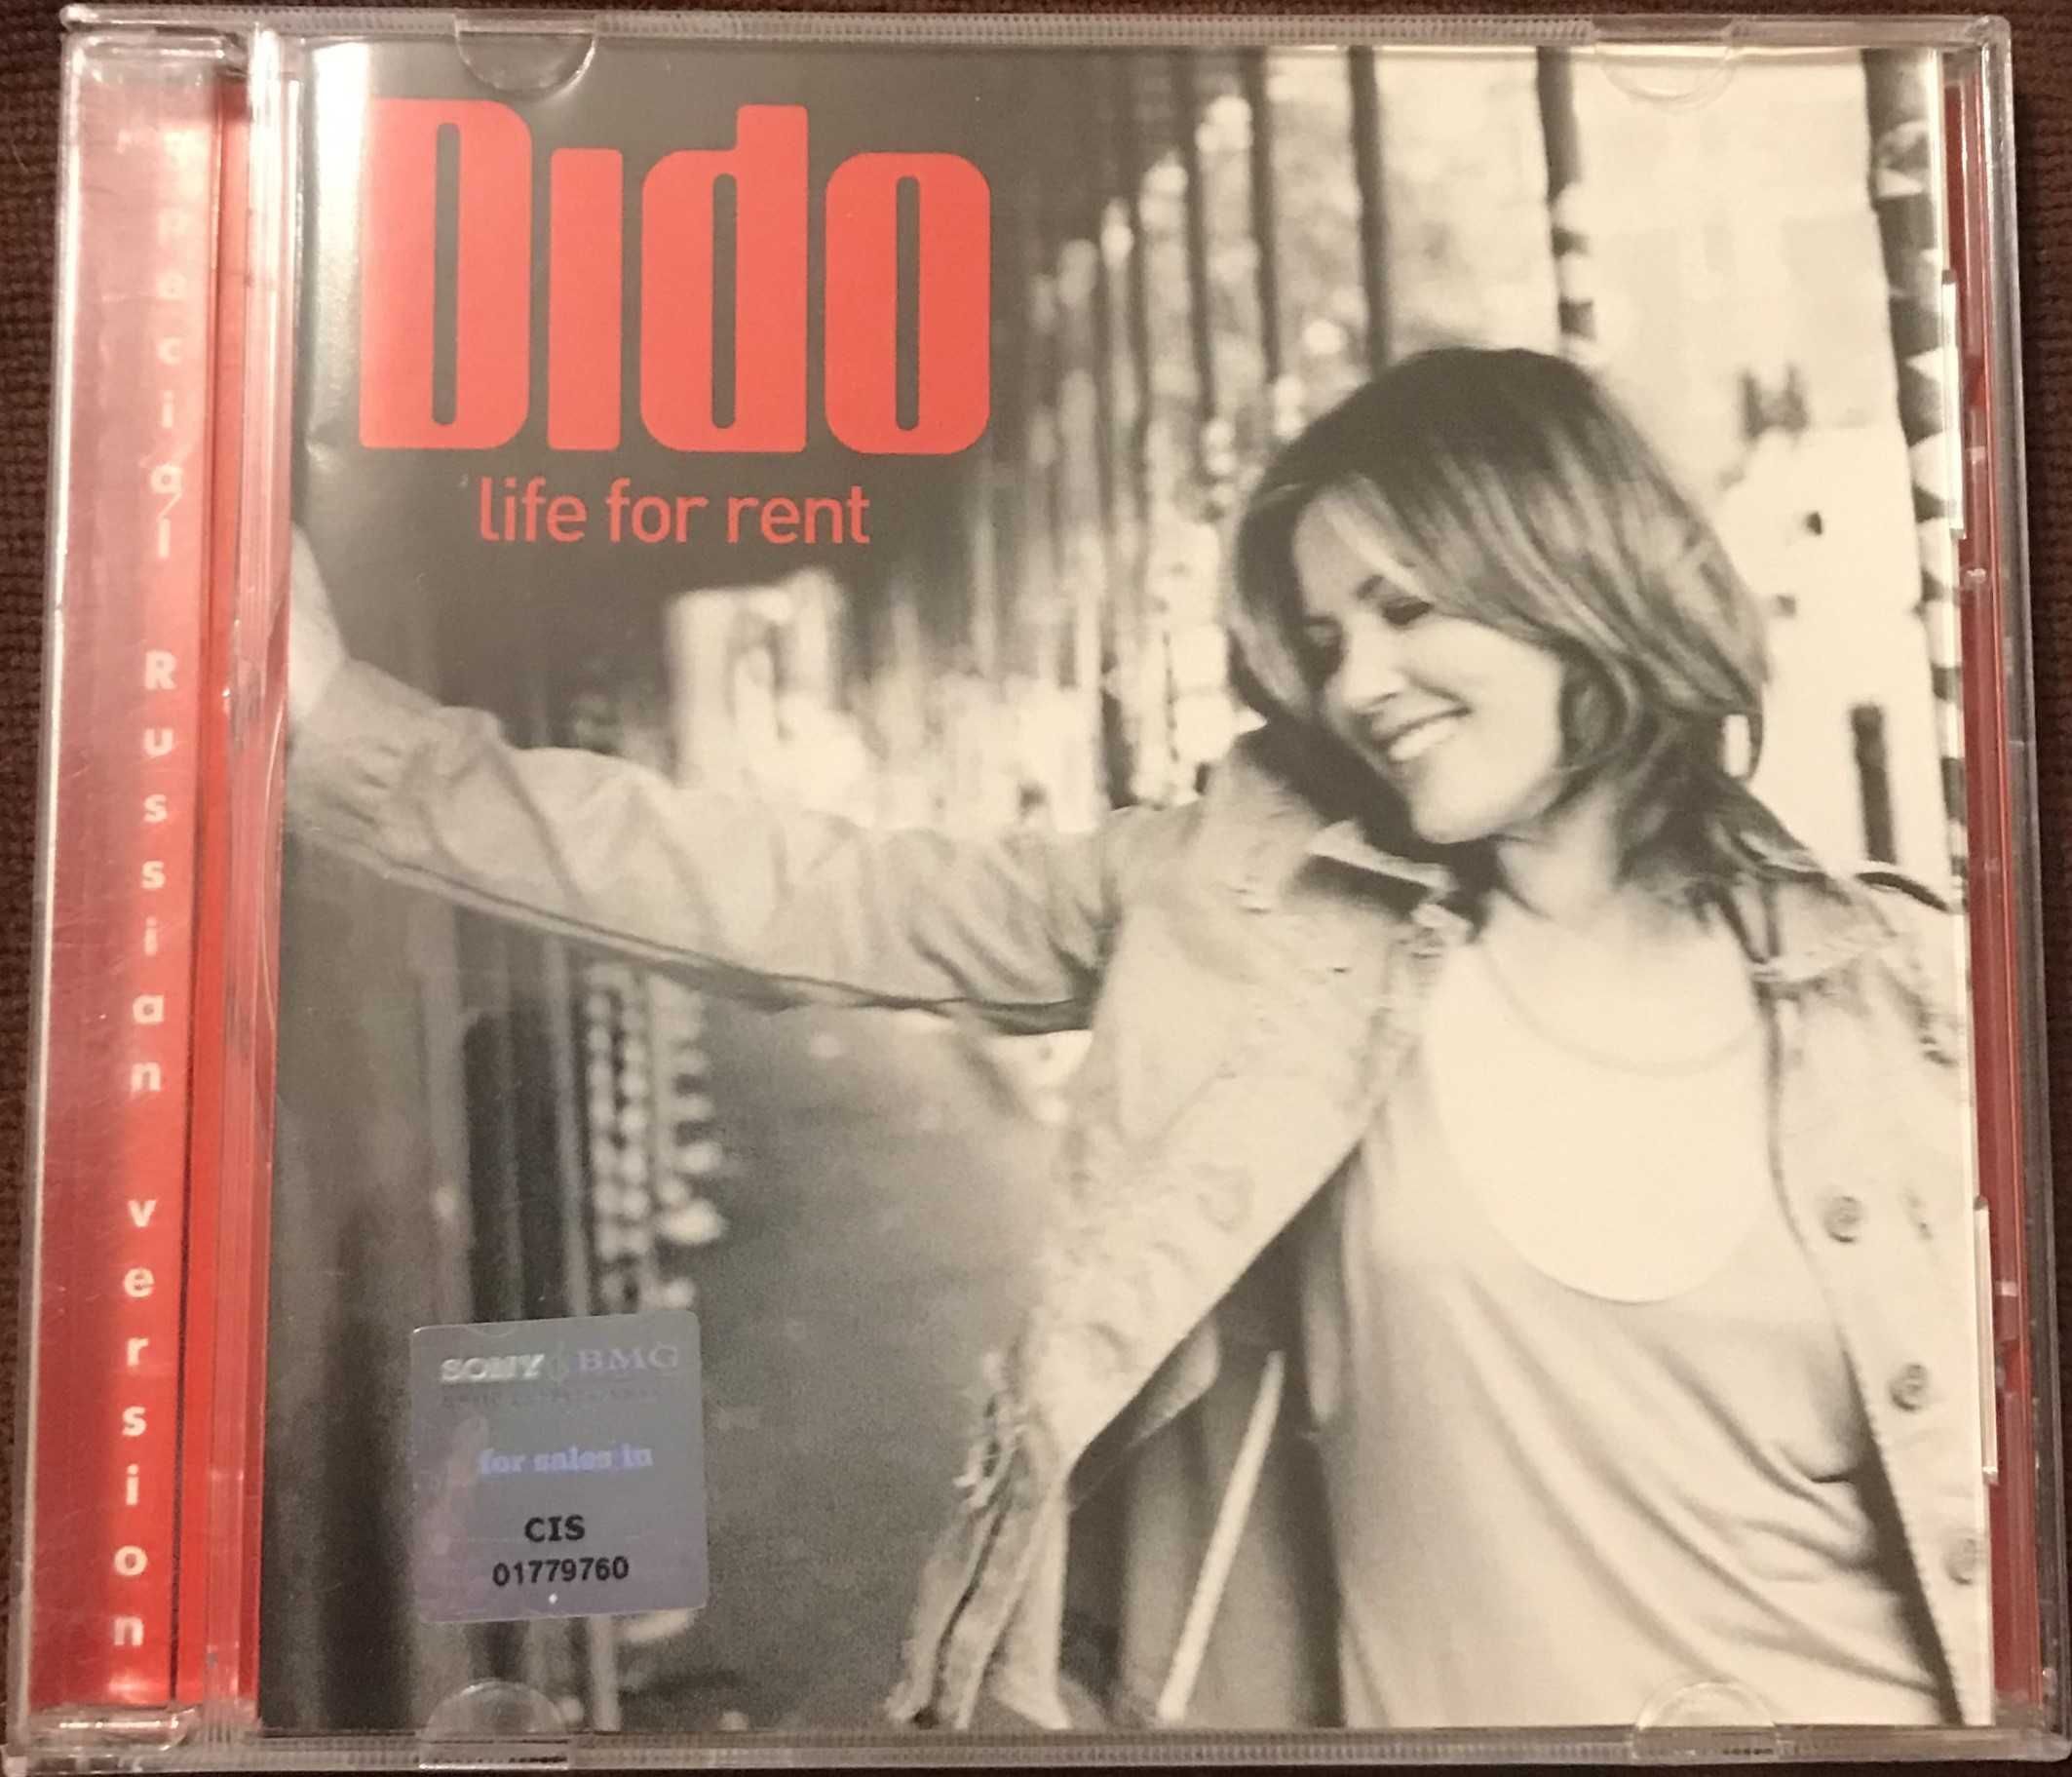 Dido "Life for Rent"